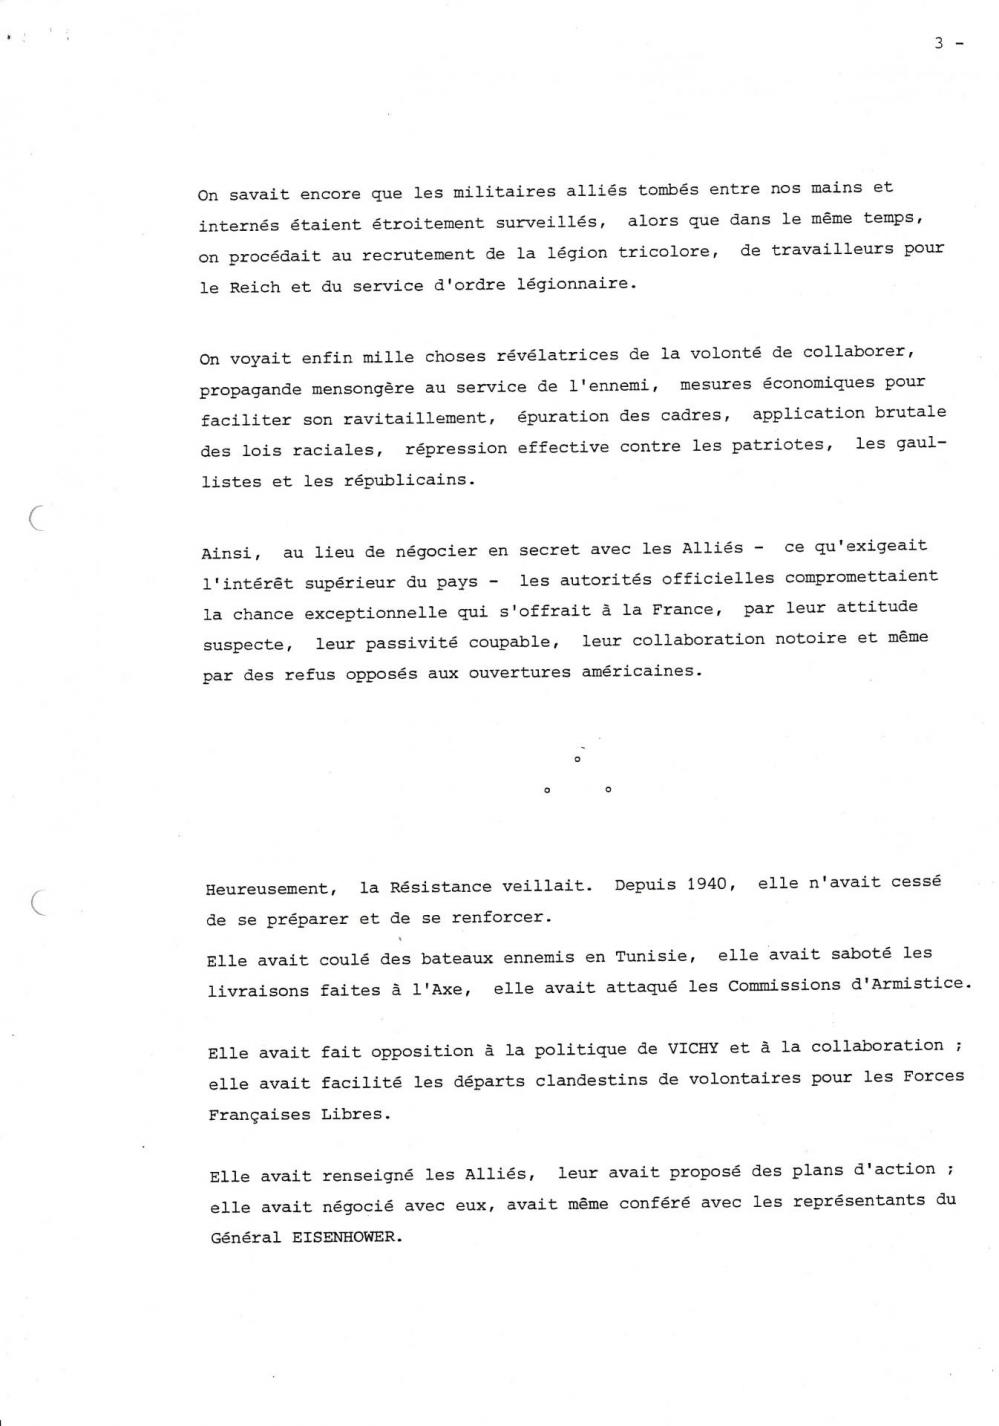 General jousse page 3